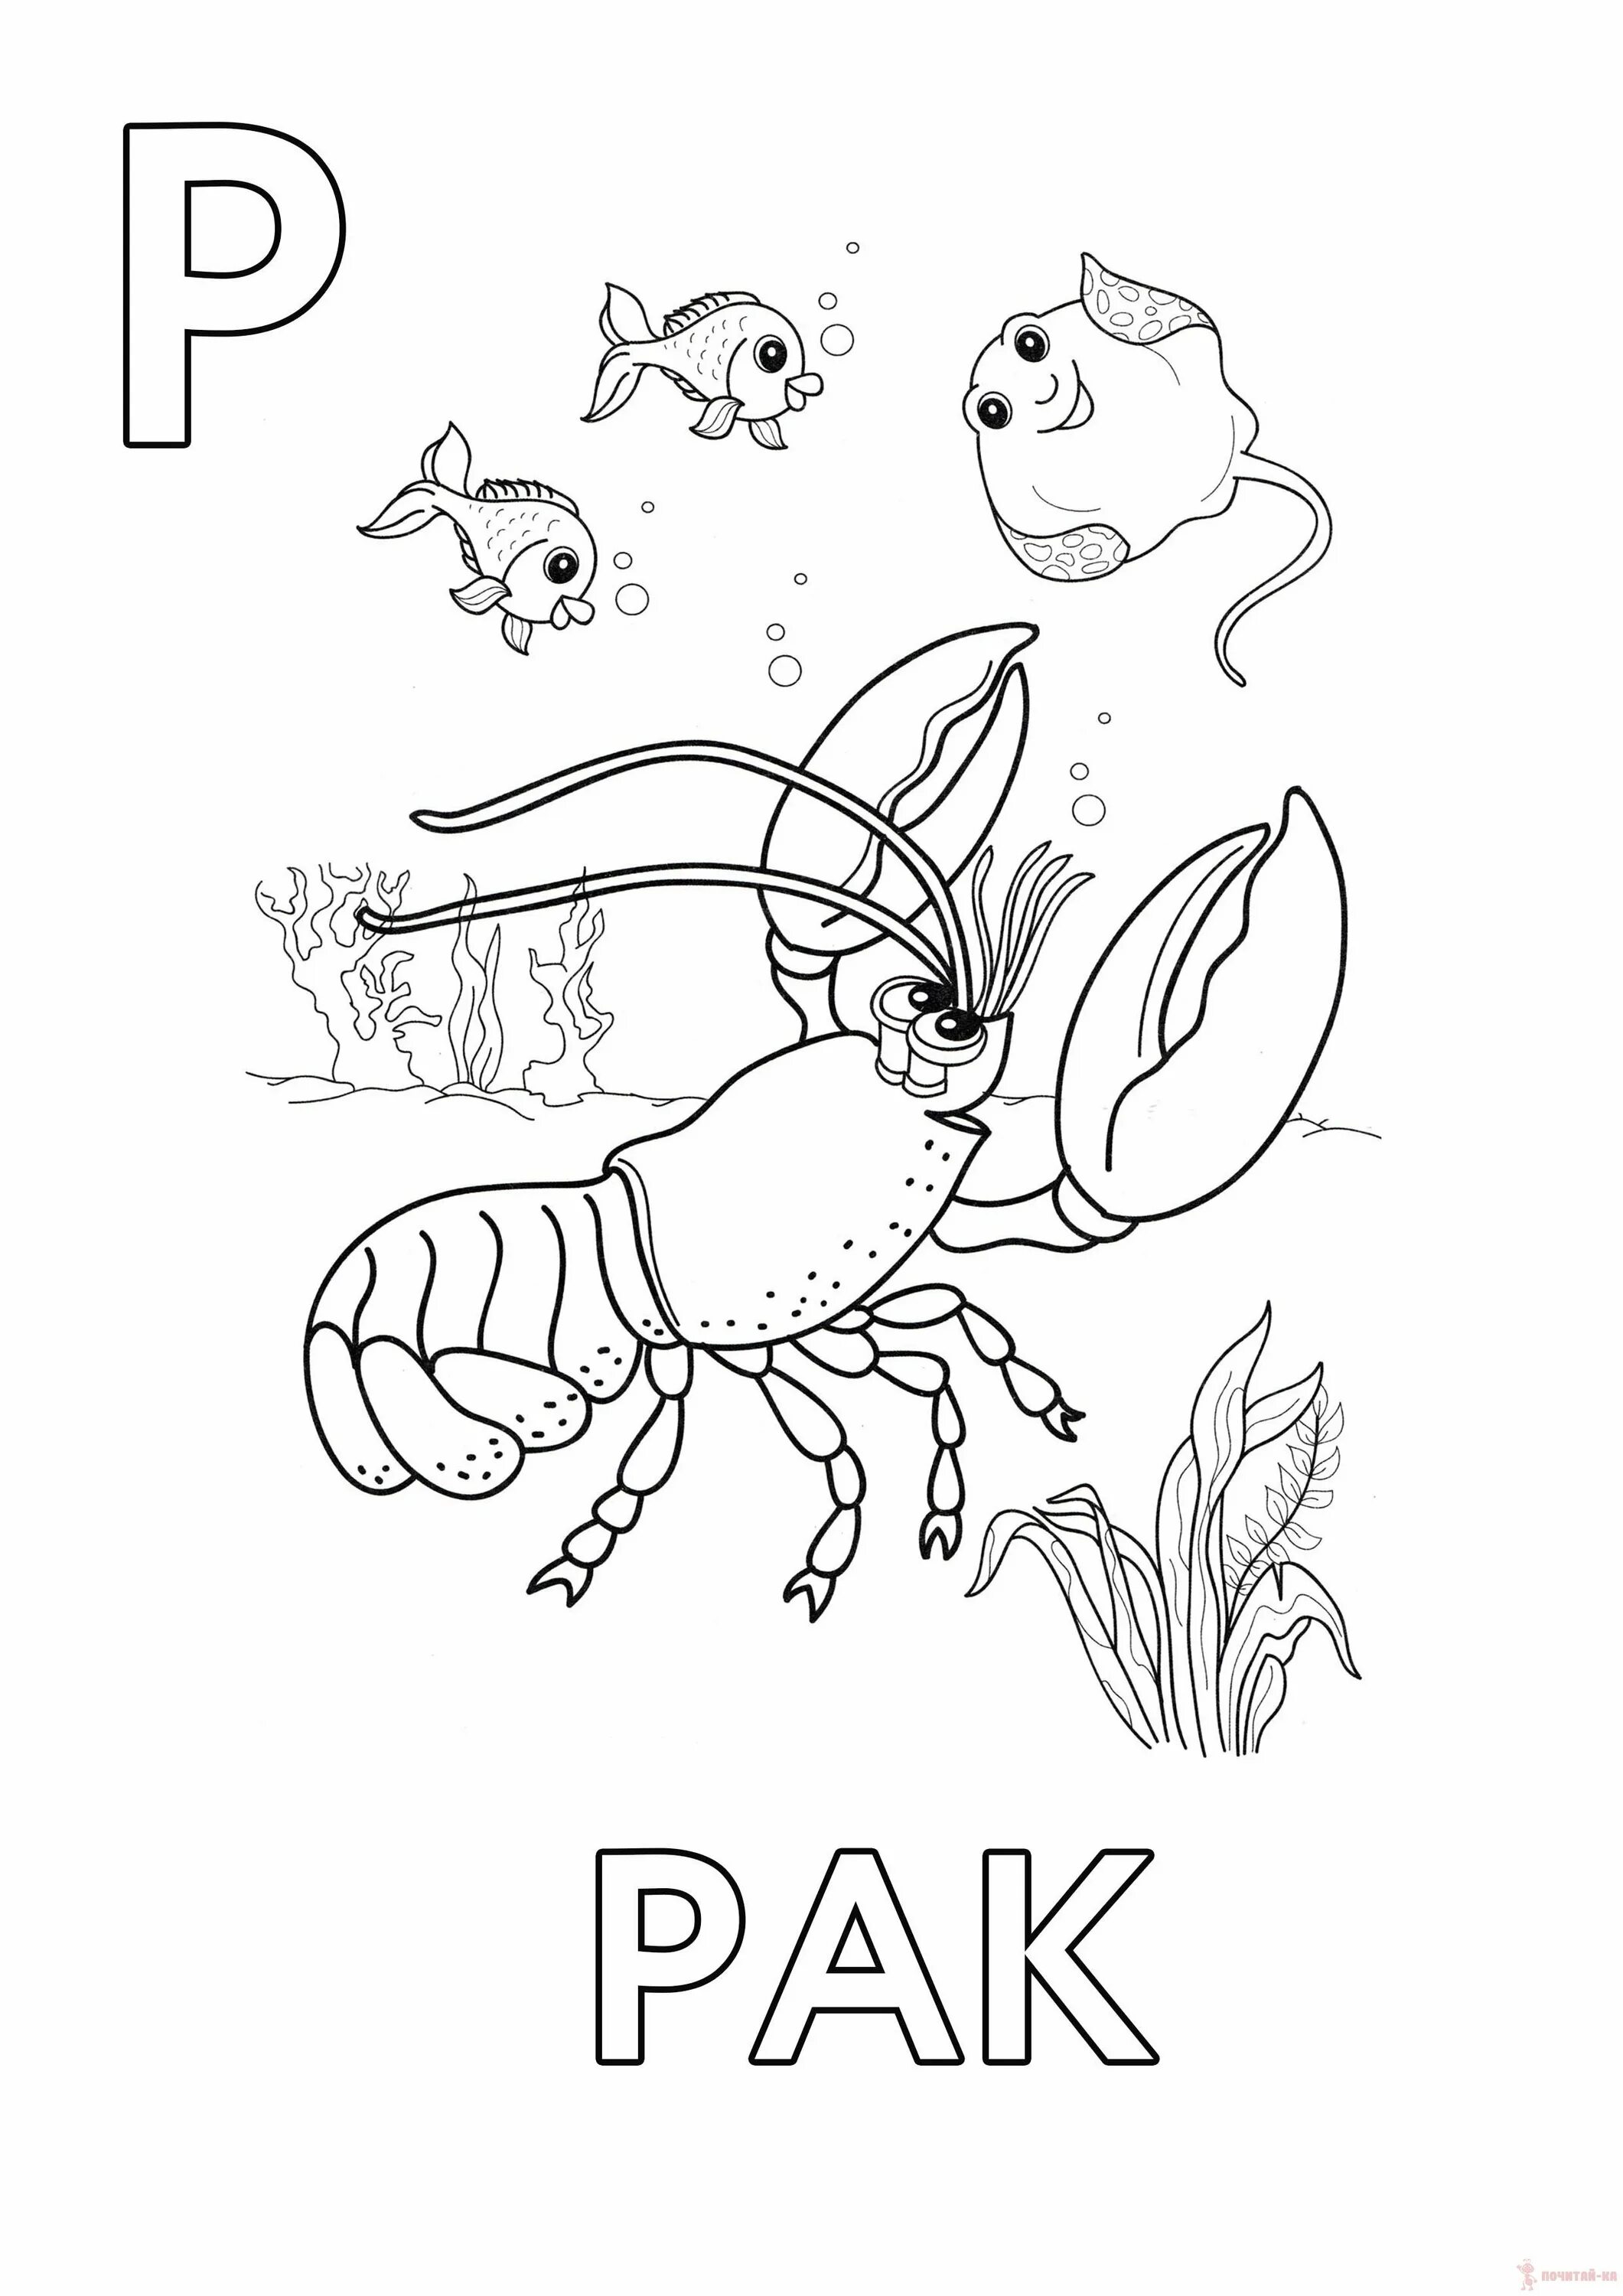 Coloring book with the letter p for preschoolers